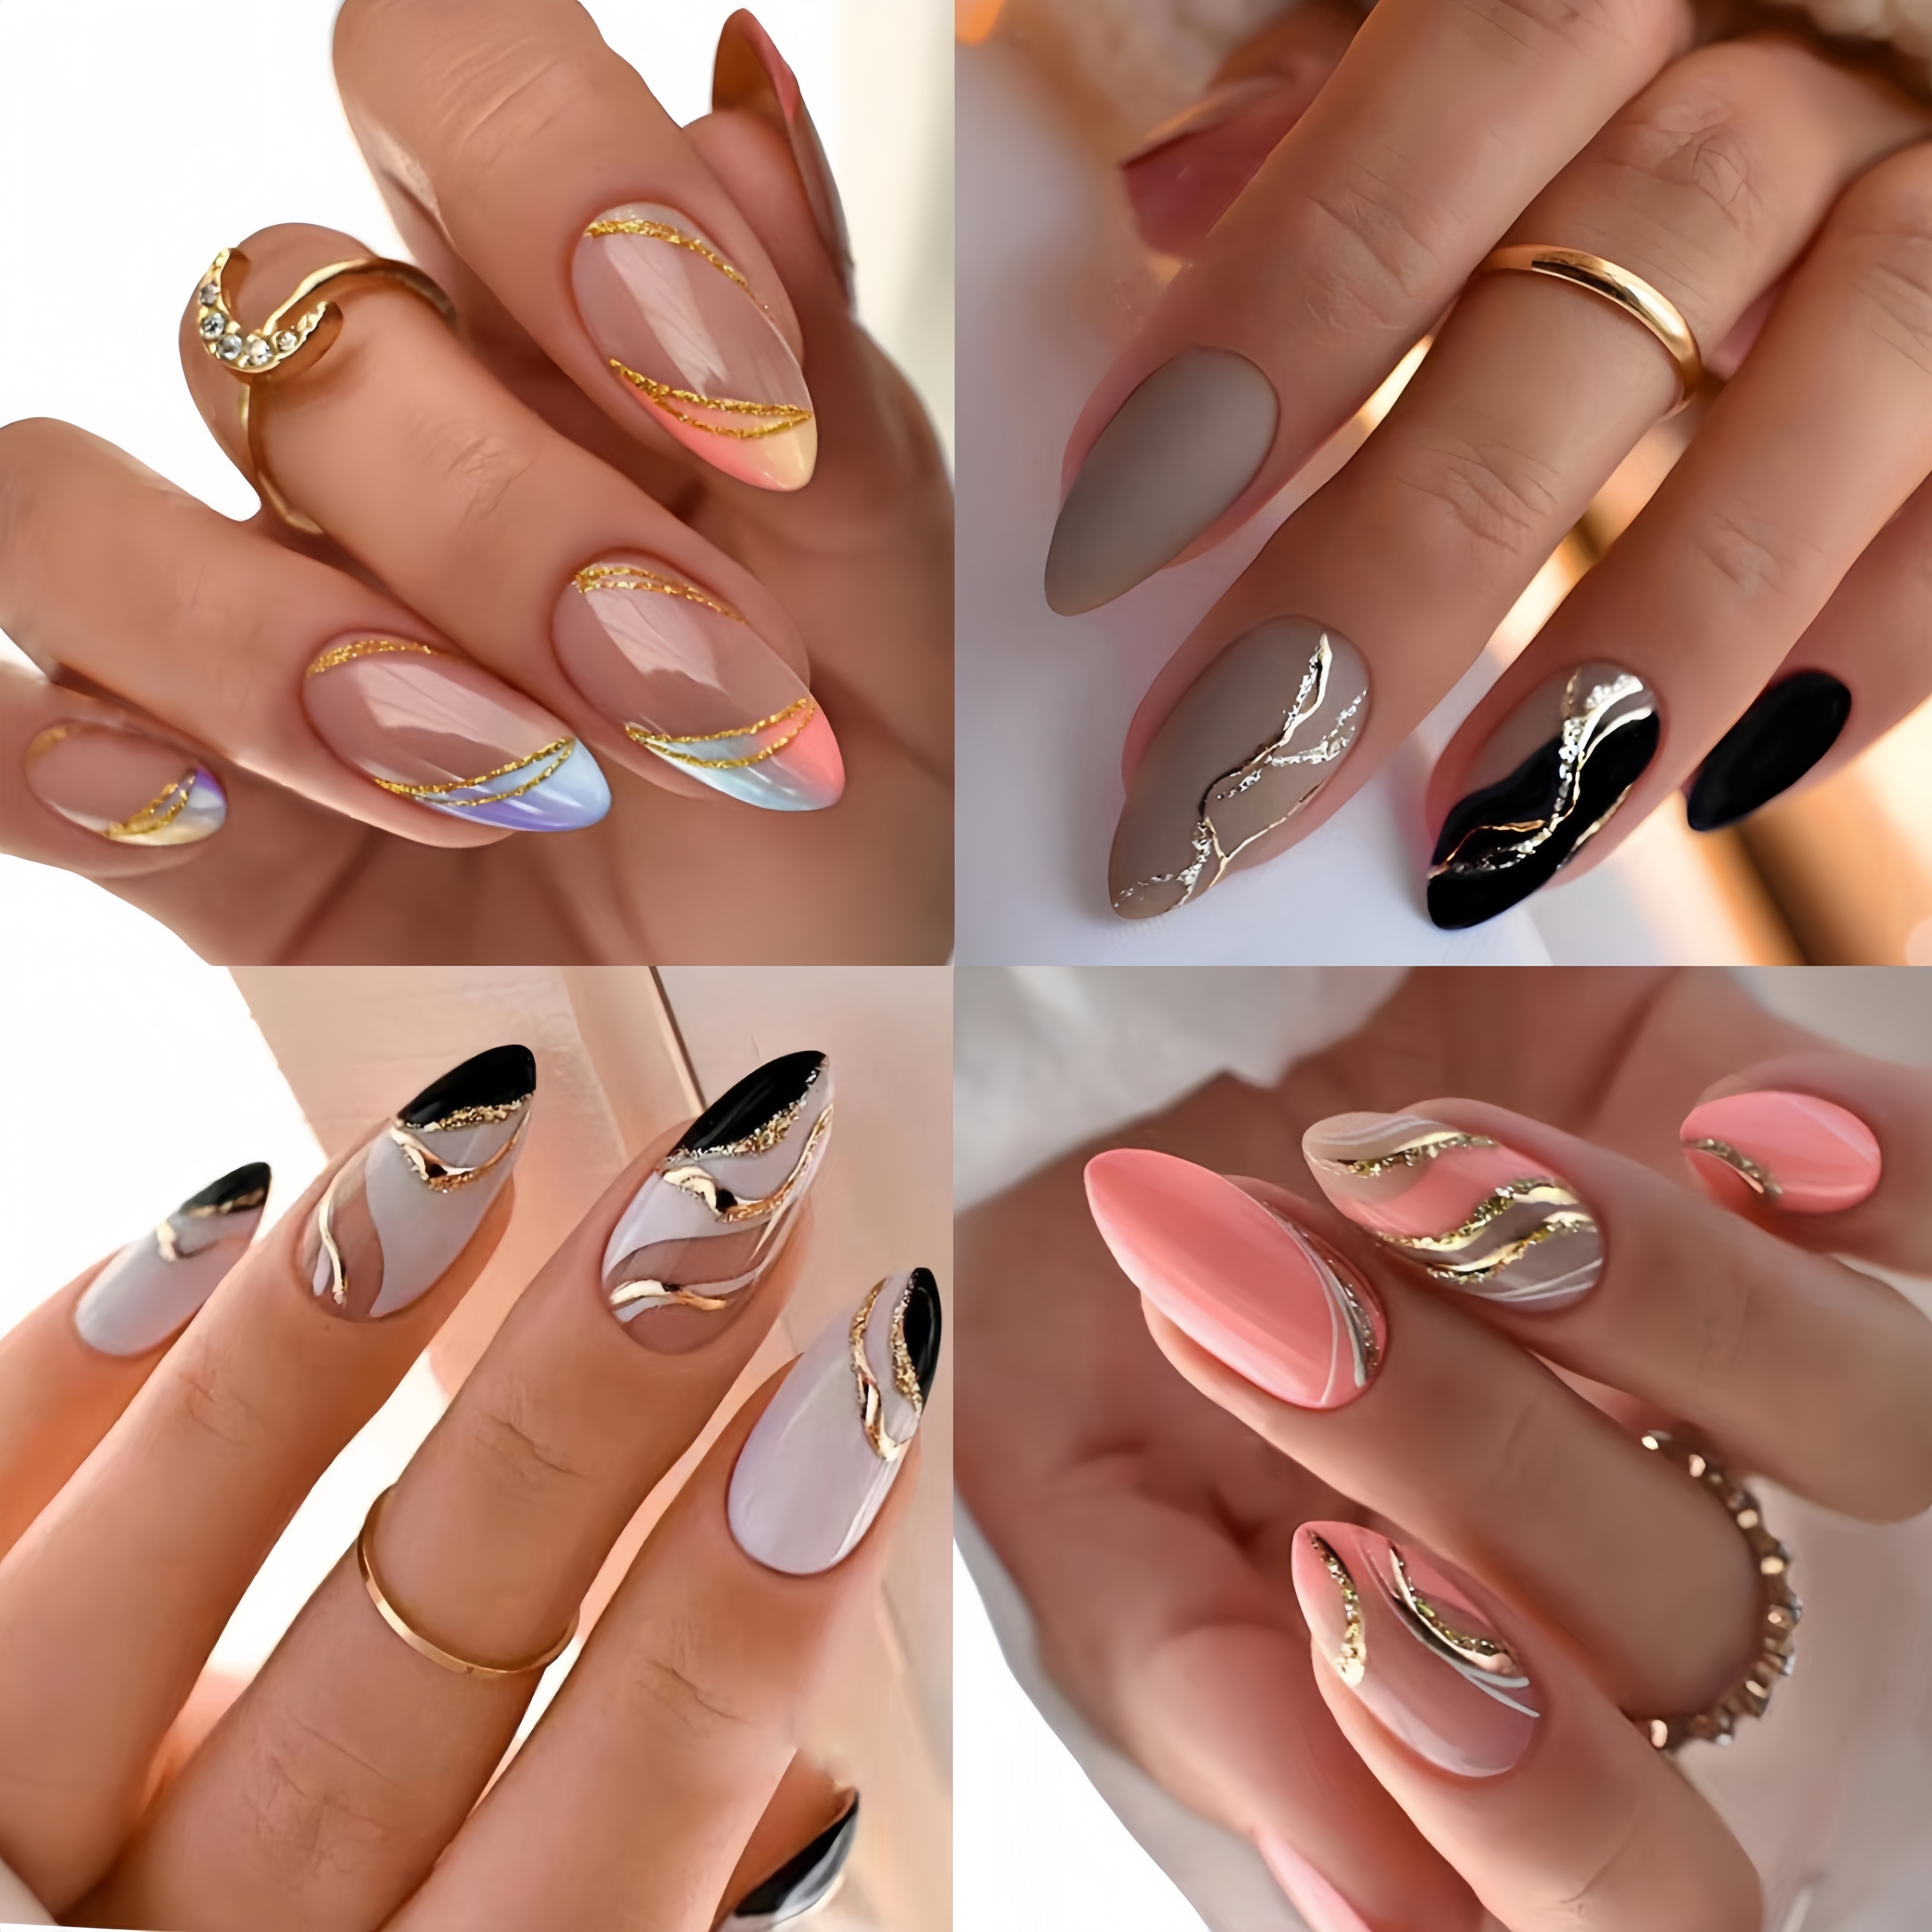 

4 Boxes (96 Pieces), Medium Almond Press On Nails, Combination Set, Colorful Fake Nails With Golden Stripe Design, Manicure Nail Art Full Cover False Nails For Women